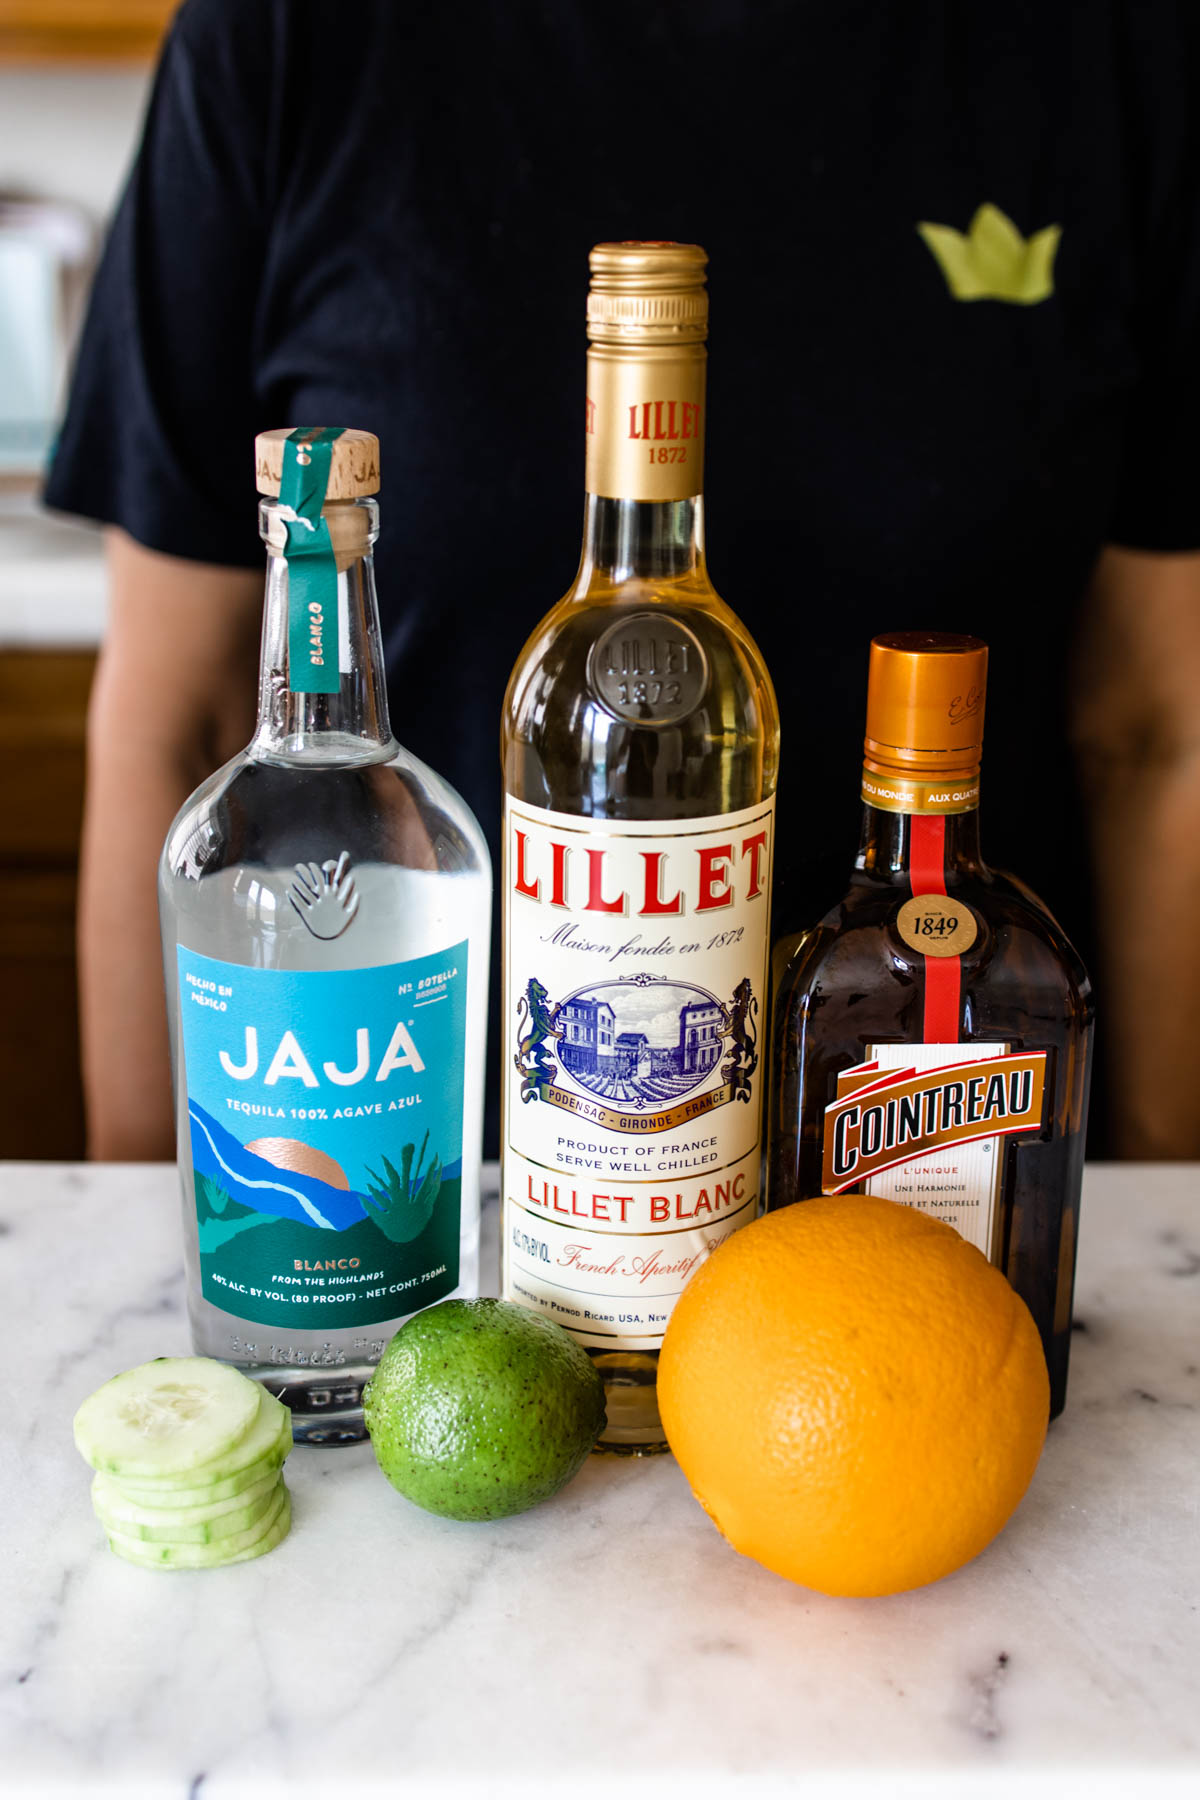 Bottles of JAJA Tequila, Lillet Blanc, Cointreau, along with lime and orange on a white counter.